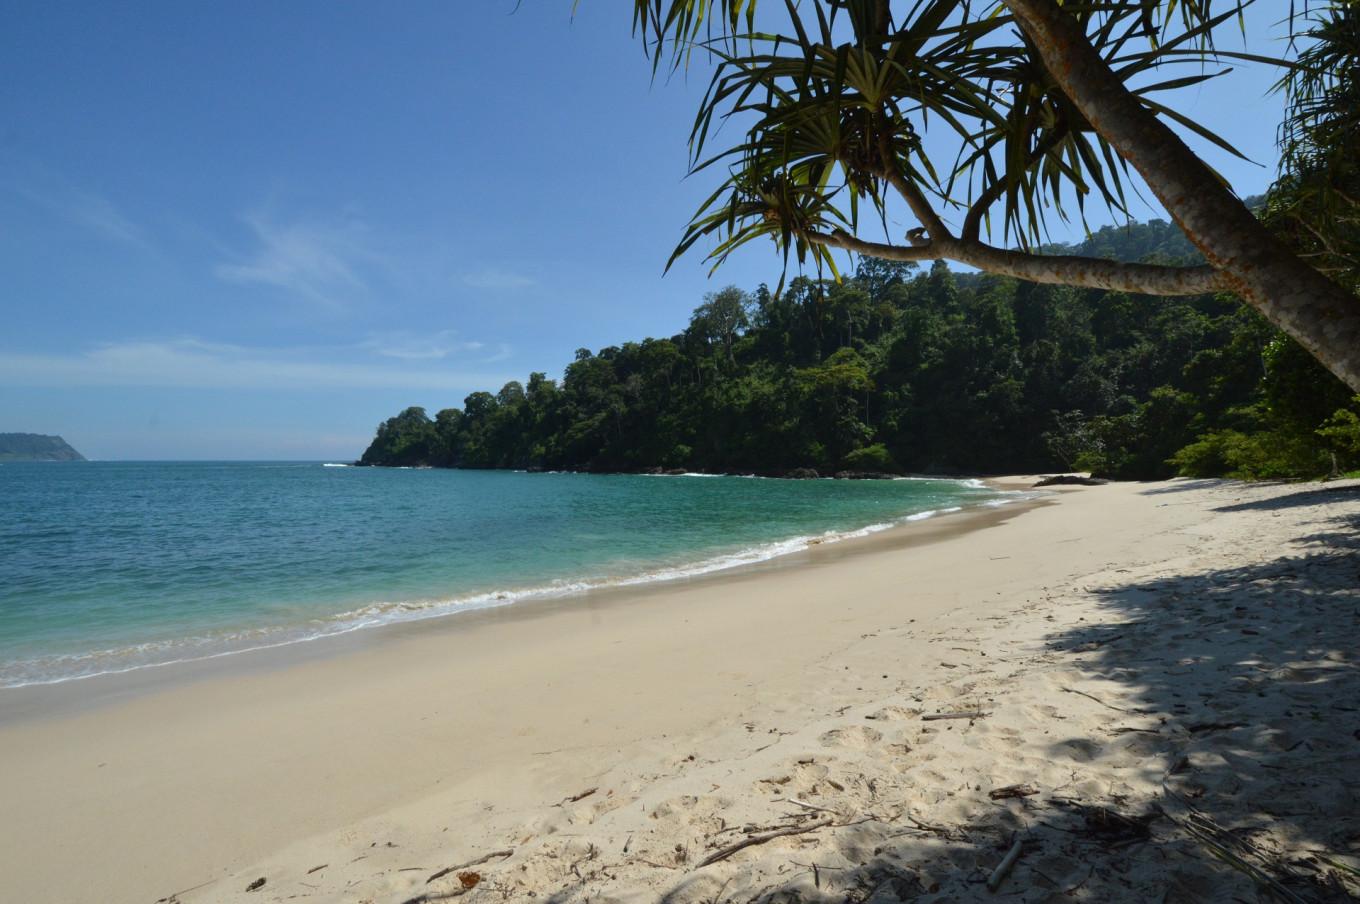 An empty beach on a sunny day with white sand, clear water, and trees along the coastline.